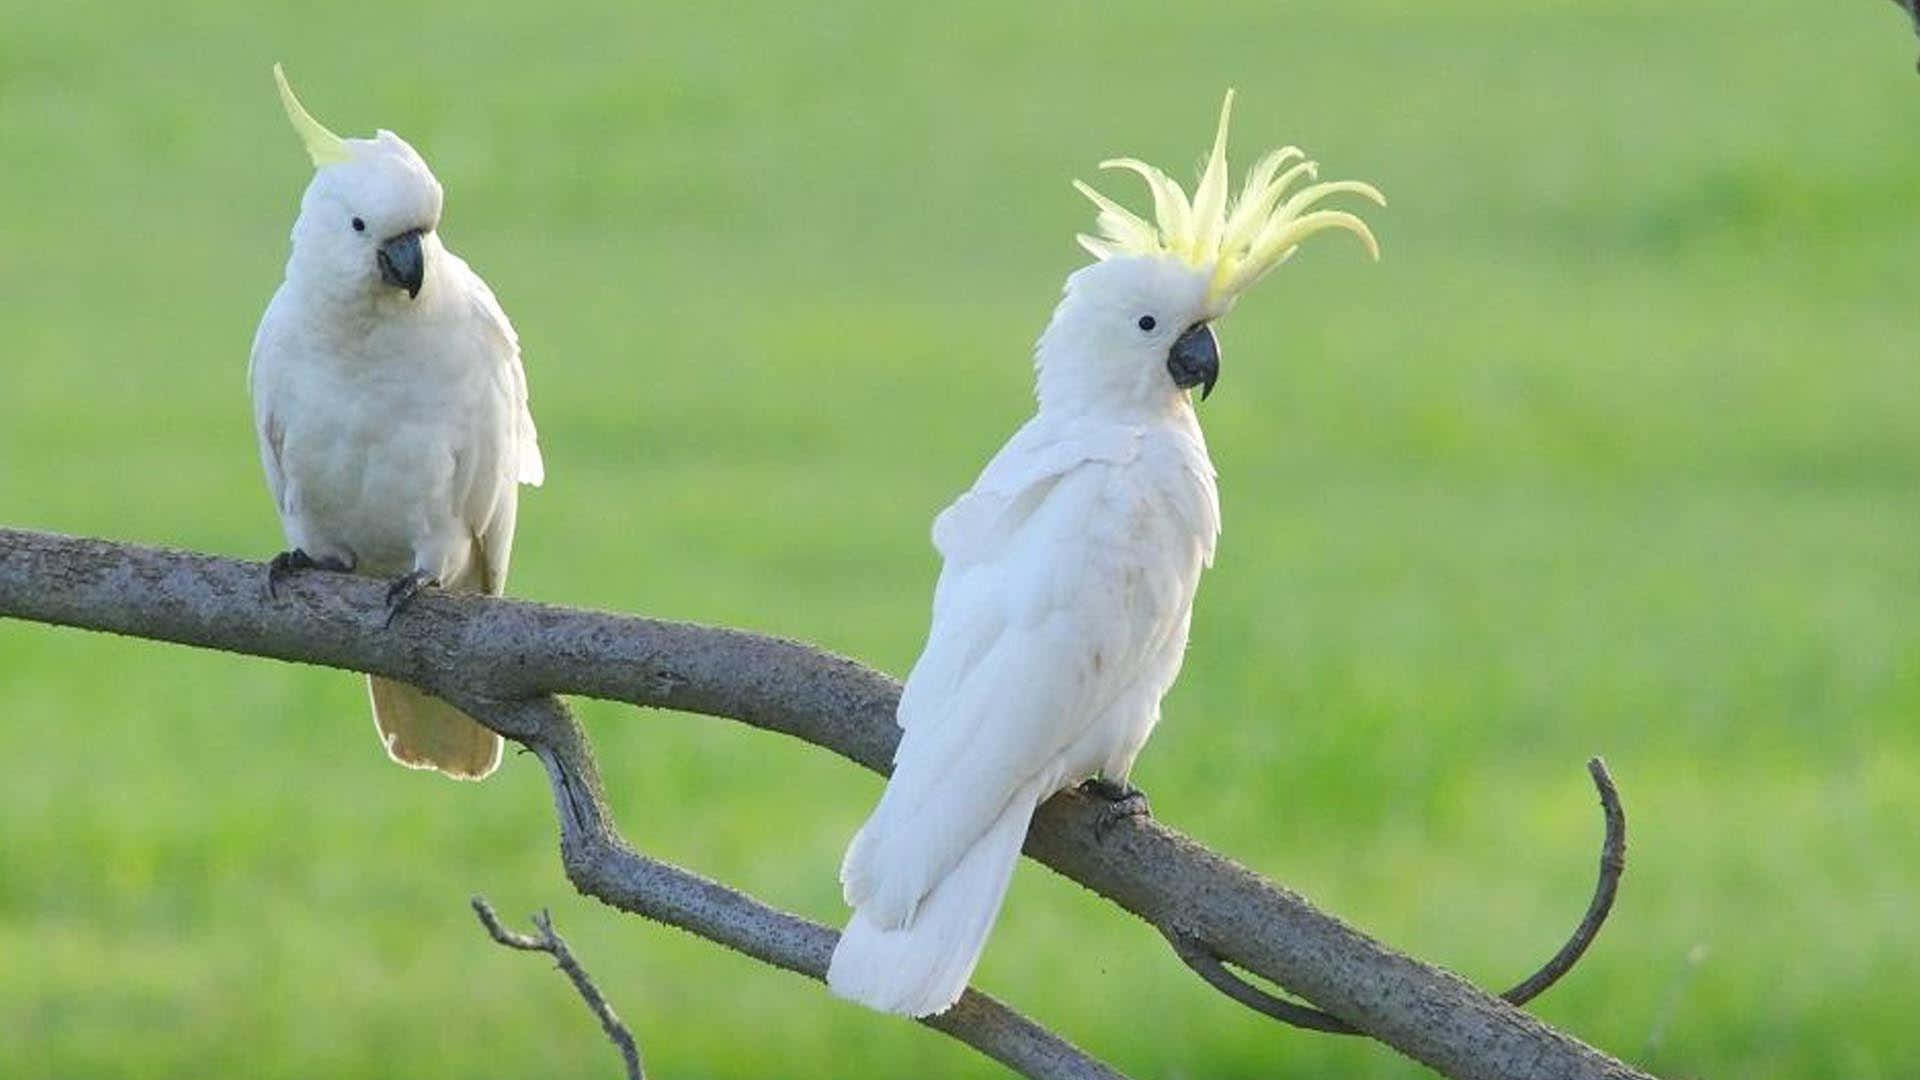 Pairof Cockatoos Perched Outdoors Wallpaper